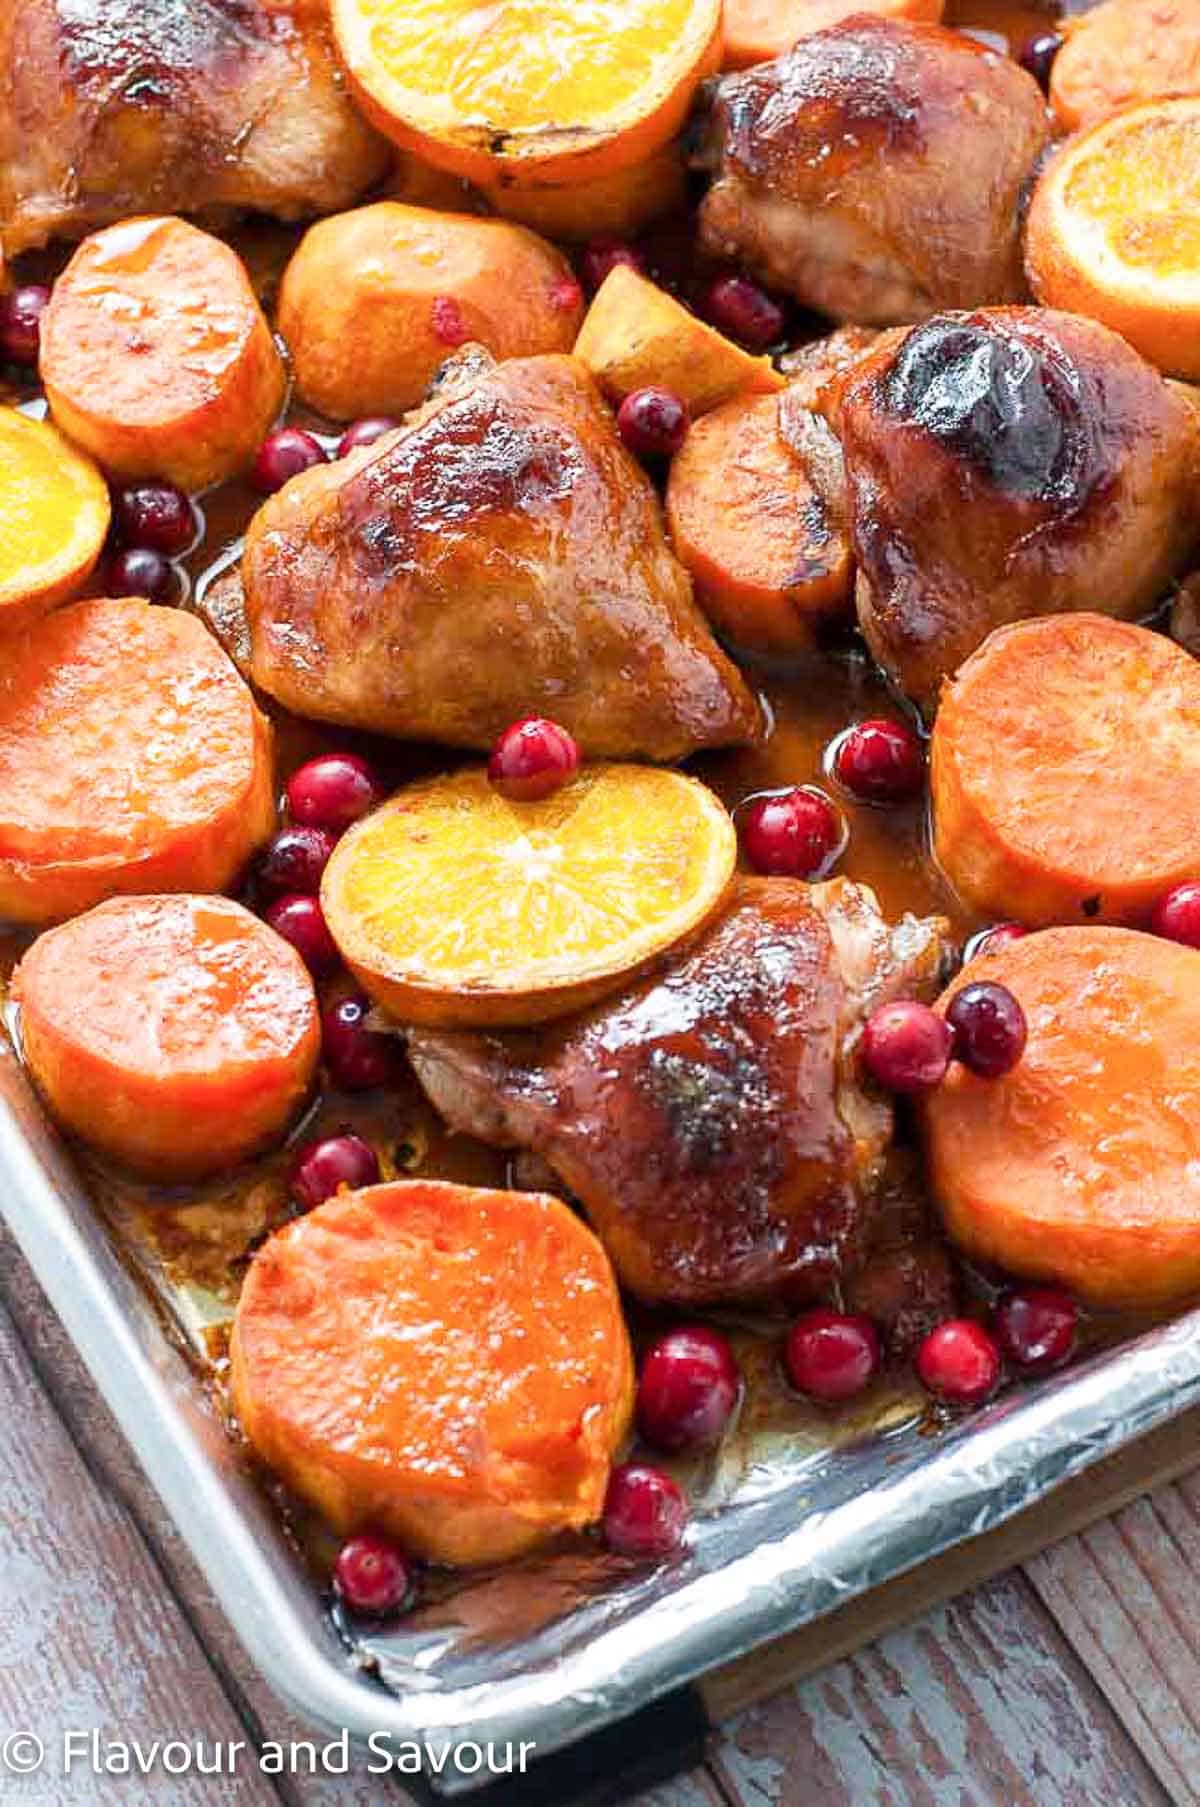 Chicken thighs with hoisin sauce, sweet potatoes, sliced oranges and fresh cranberries baked on a sheet pan.